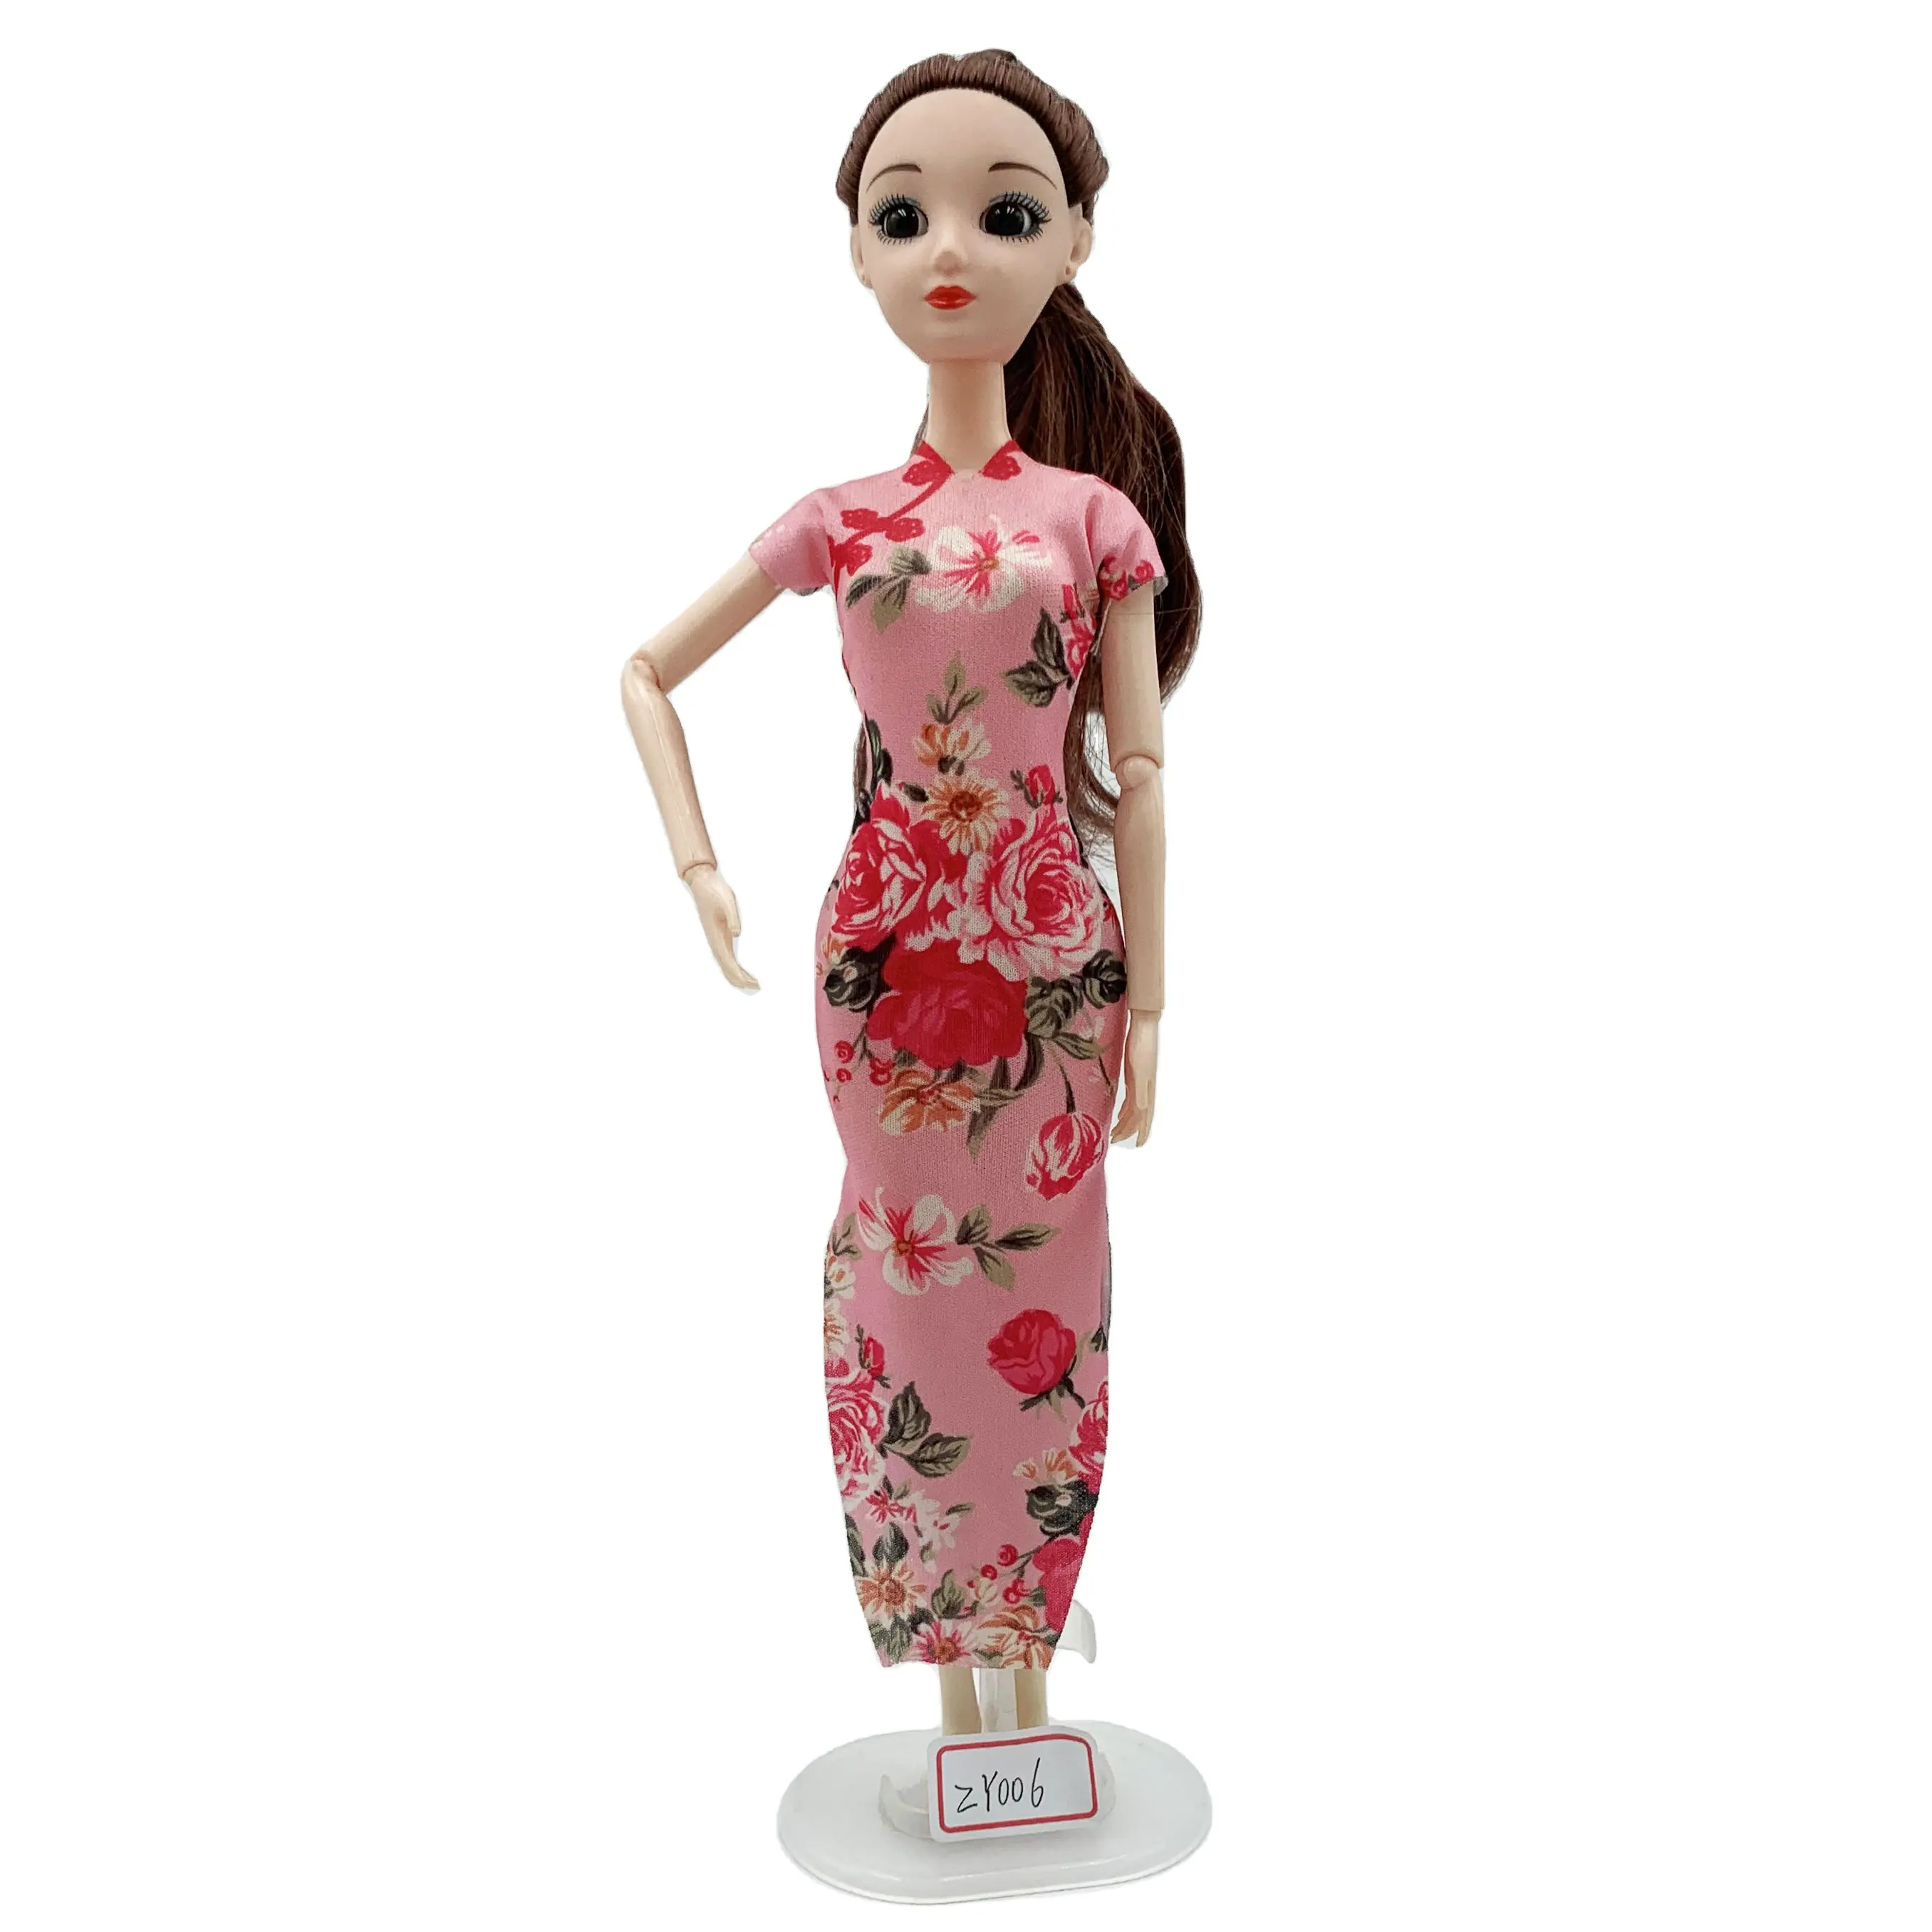 2022 new Bobby doll Chinese style cheongsam children's doll toys costume accessories dressup game